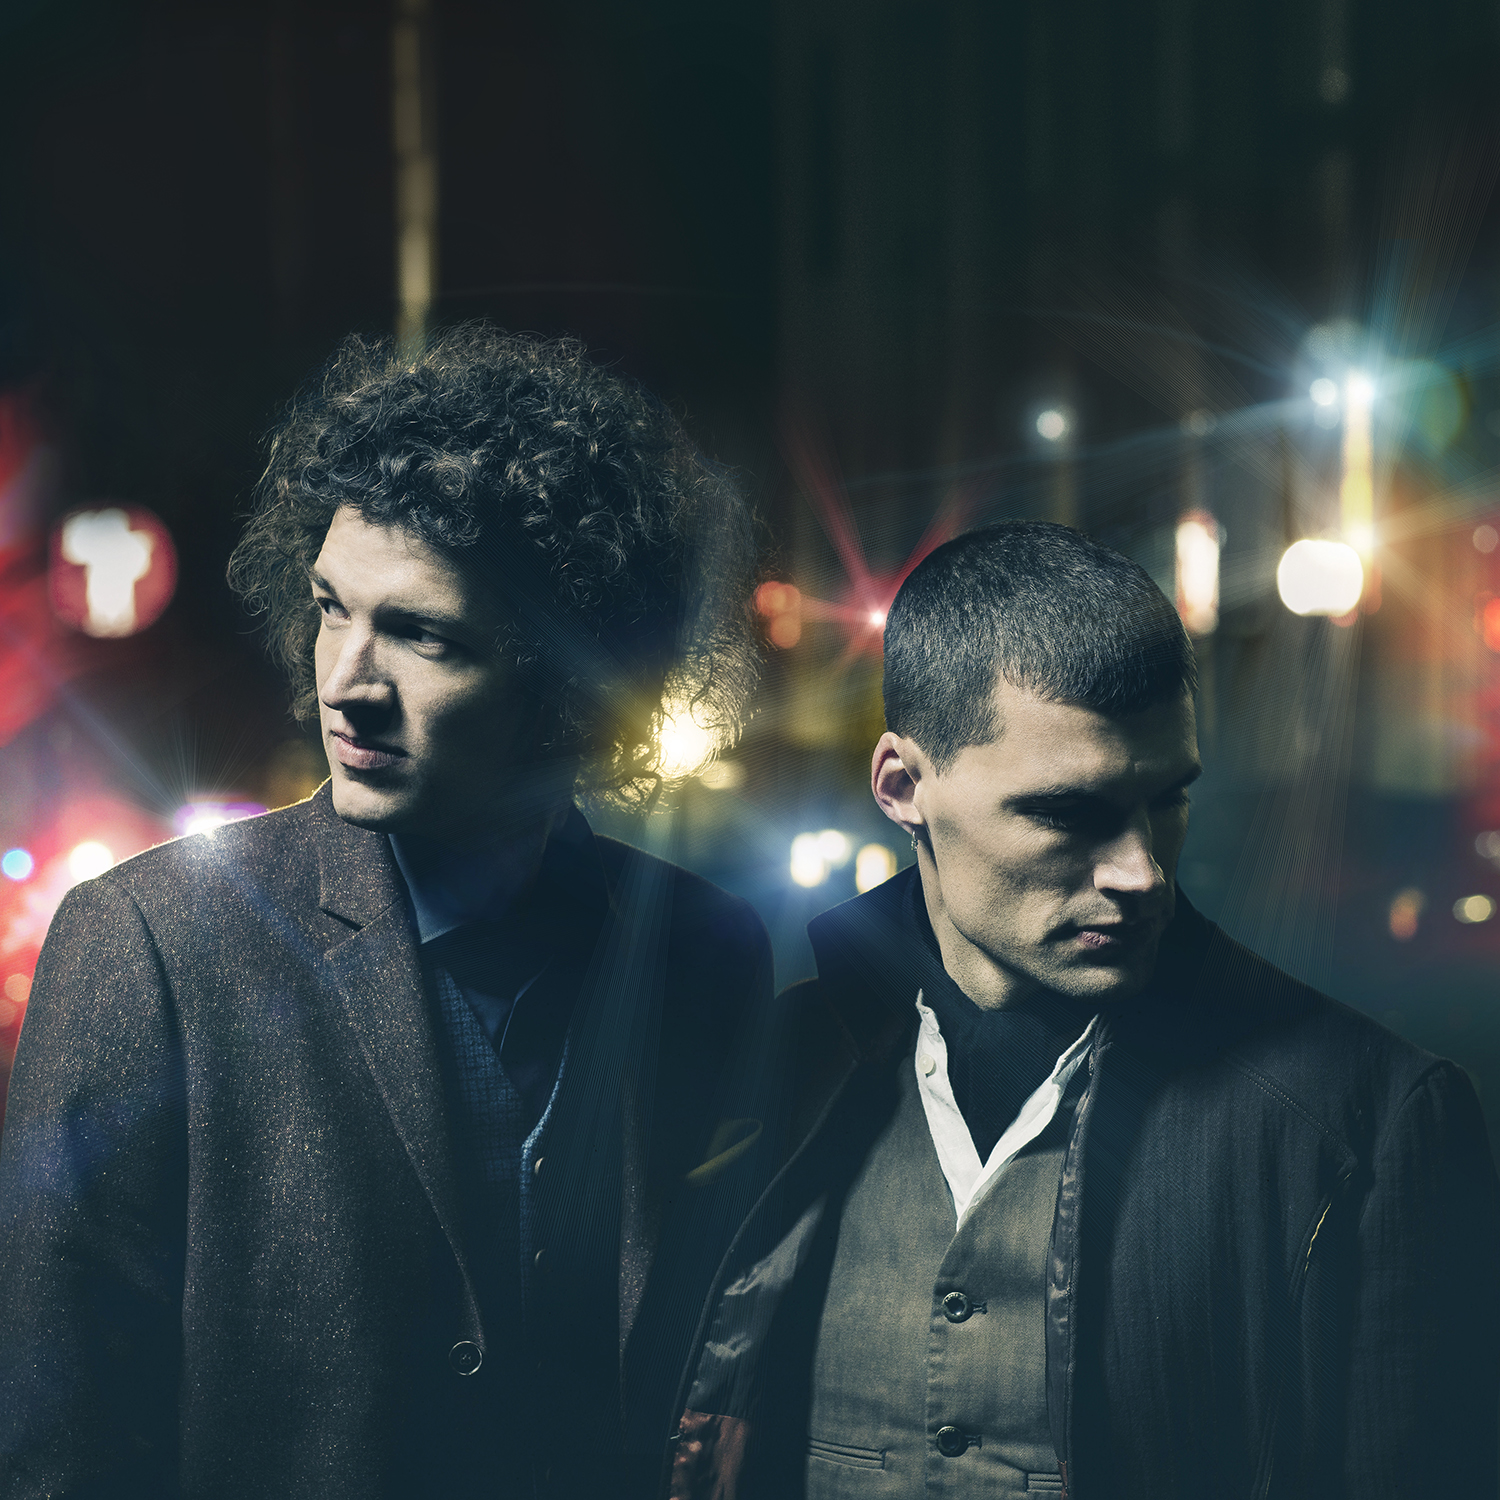 For KING & COUNTRY promo image